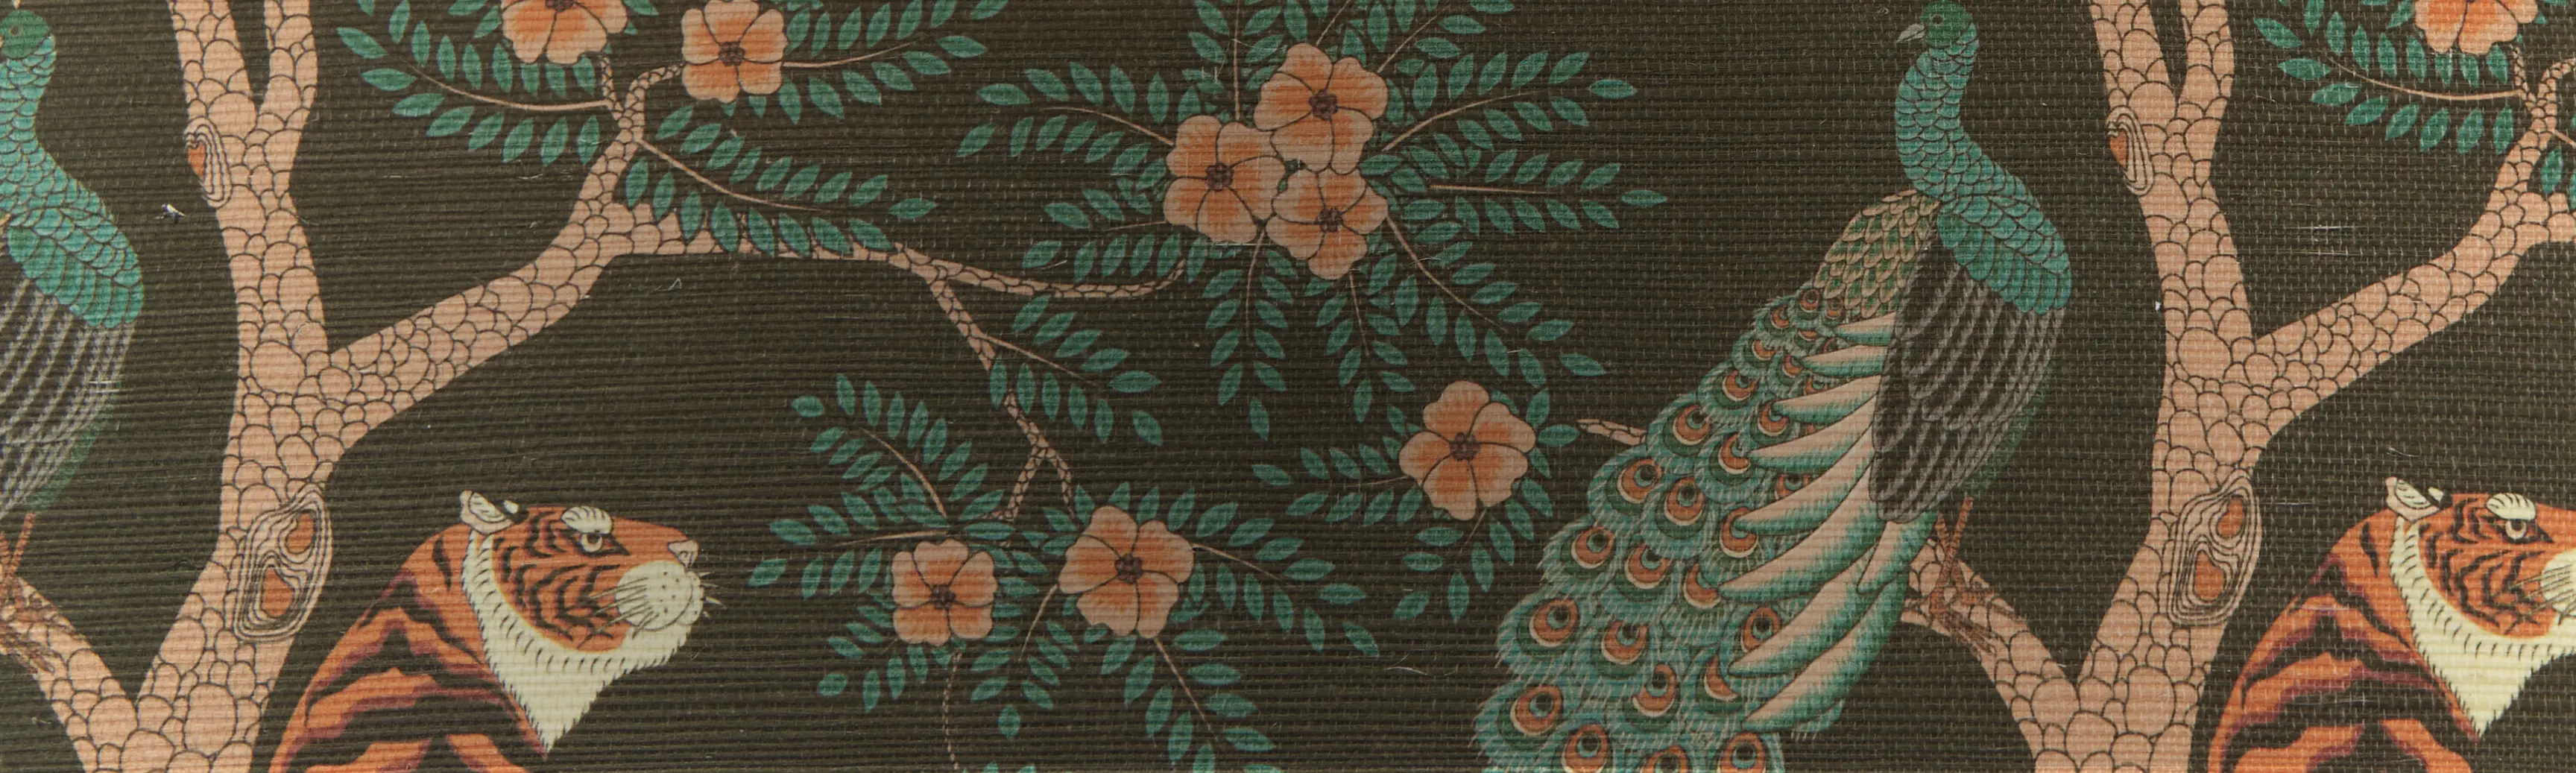 Grasscloth wallpaper featuring tiger and peacock design